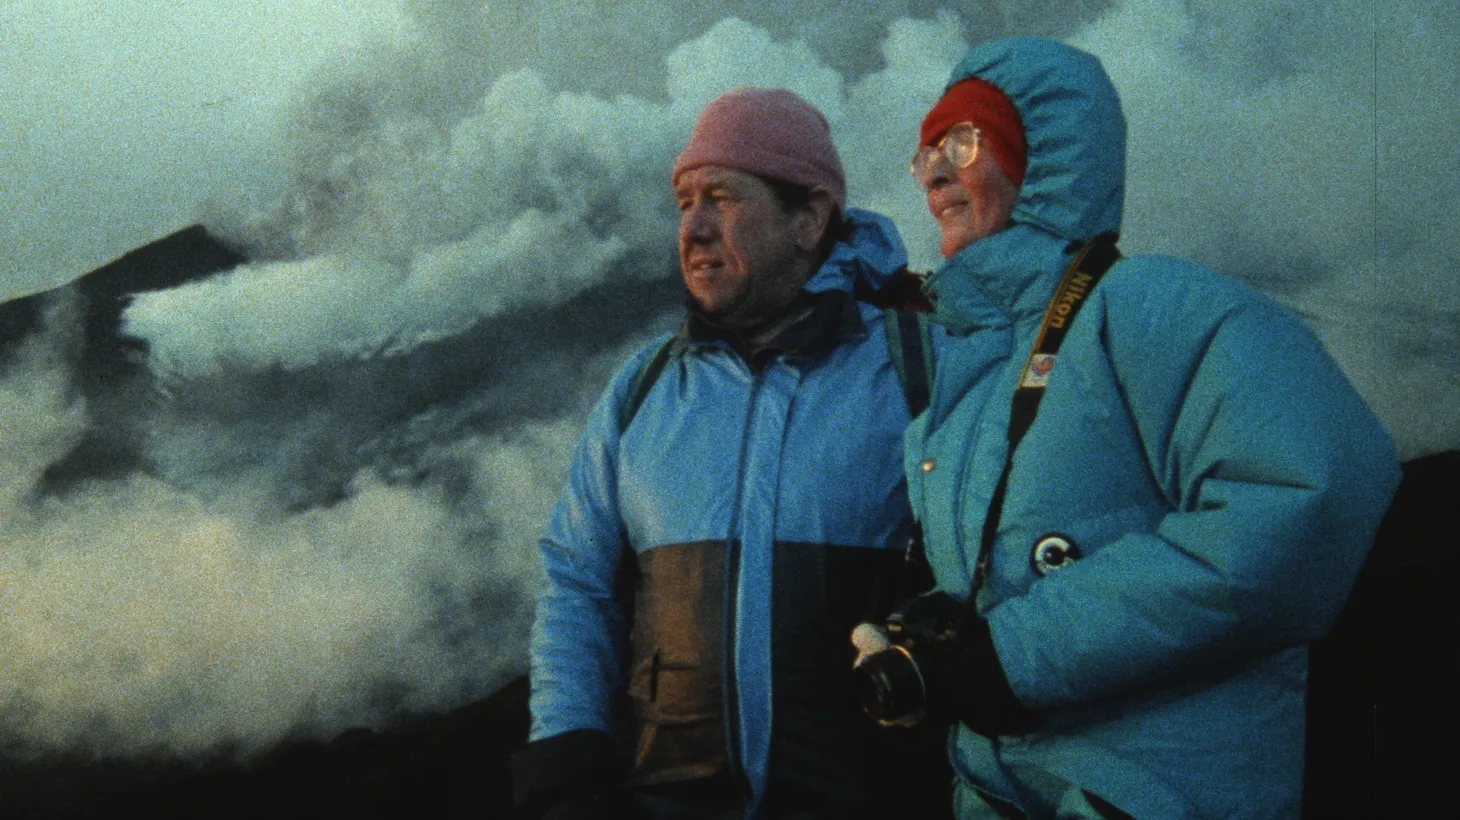 “I firmly believe that [the Kraffts knew] that at any moment could be their last, and that propelled them towards this beautiful, deeply meaningful life where they boldly pursued what they loved most in the world, which were volcanoes,” says filmmaker Sara Dosa. Maurice and Katia Krafft gaze upon a volcano in the distance as smoke and ash swirl behind them.